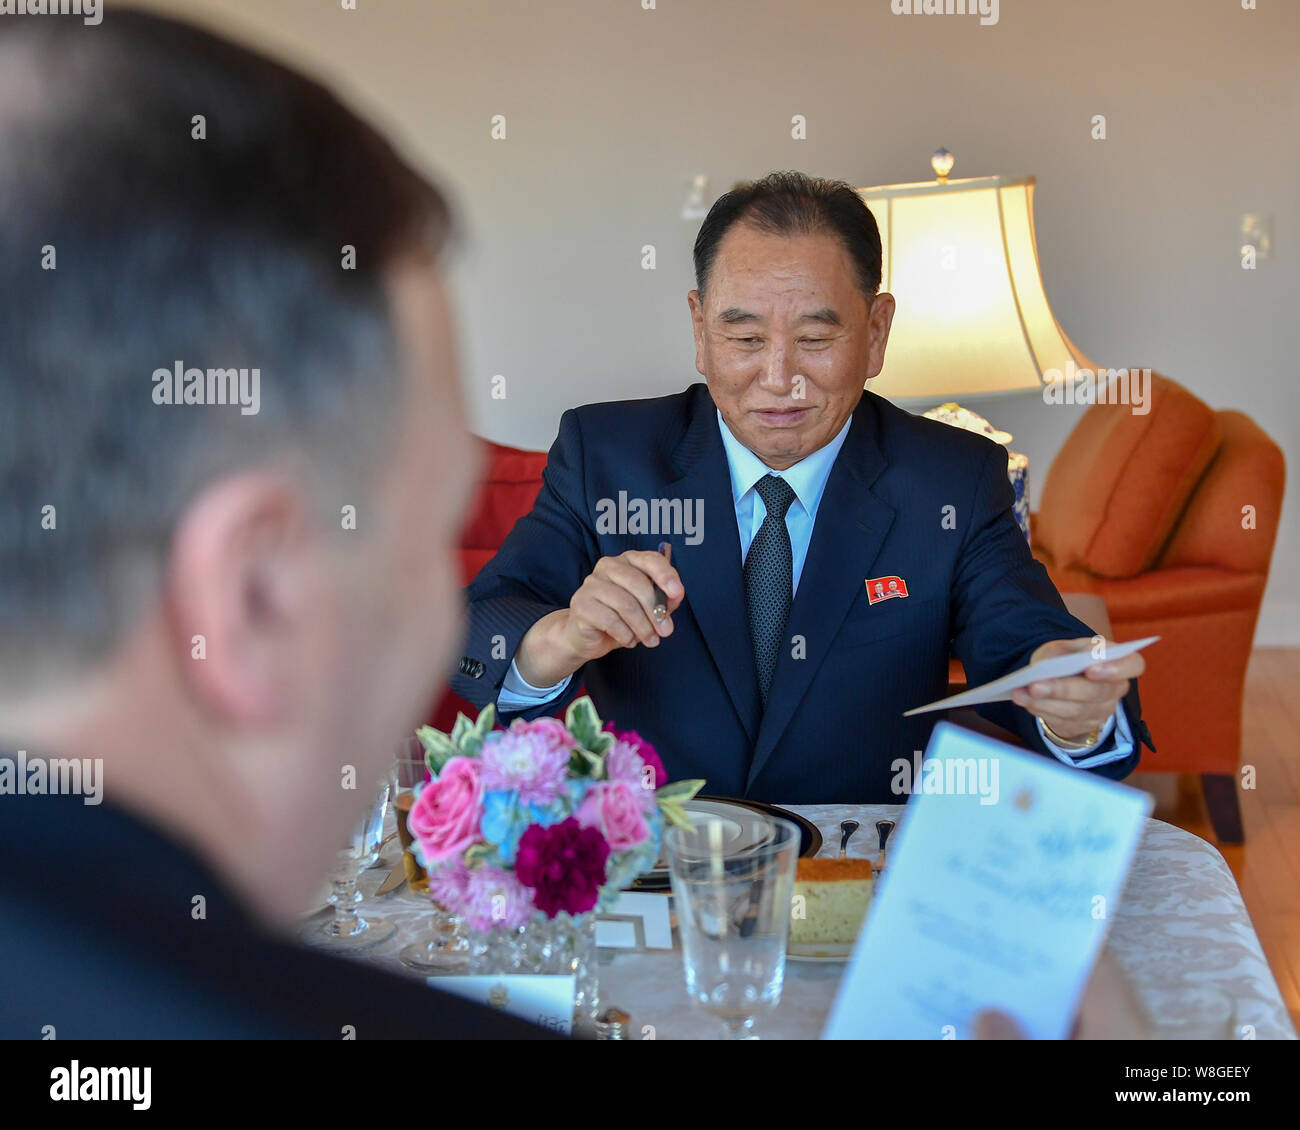 U.S. Secretary of State Mike Pompeo and DPRK Vice-Chairman of the Central Committee Kim Yong Chol sign their menu cards prior to a working dinner in N Stock Photo